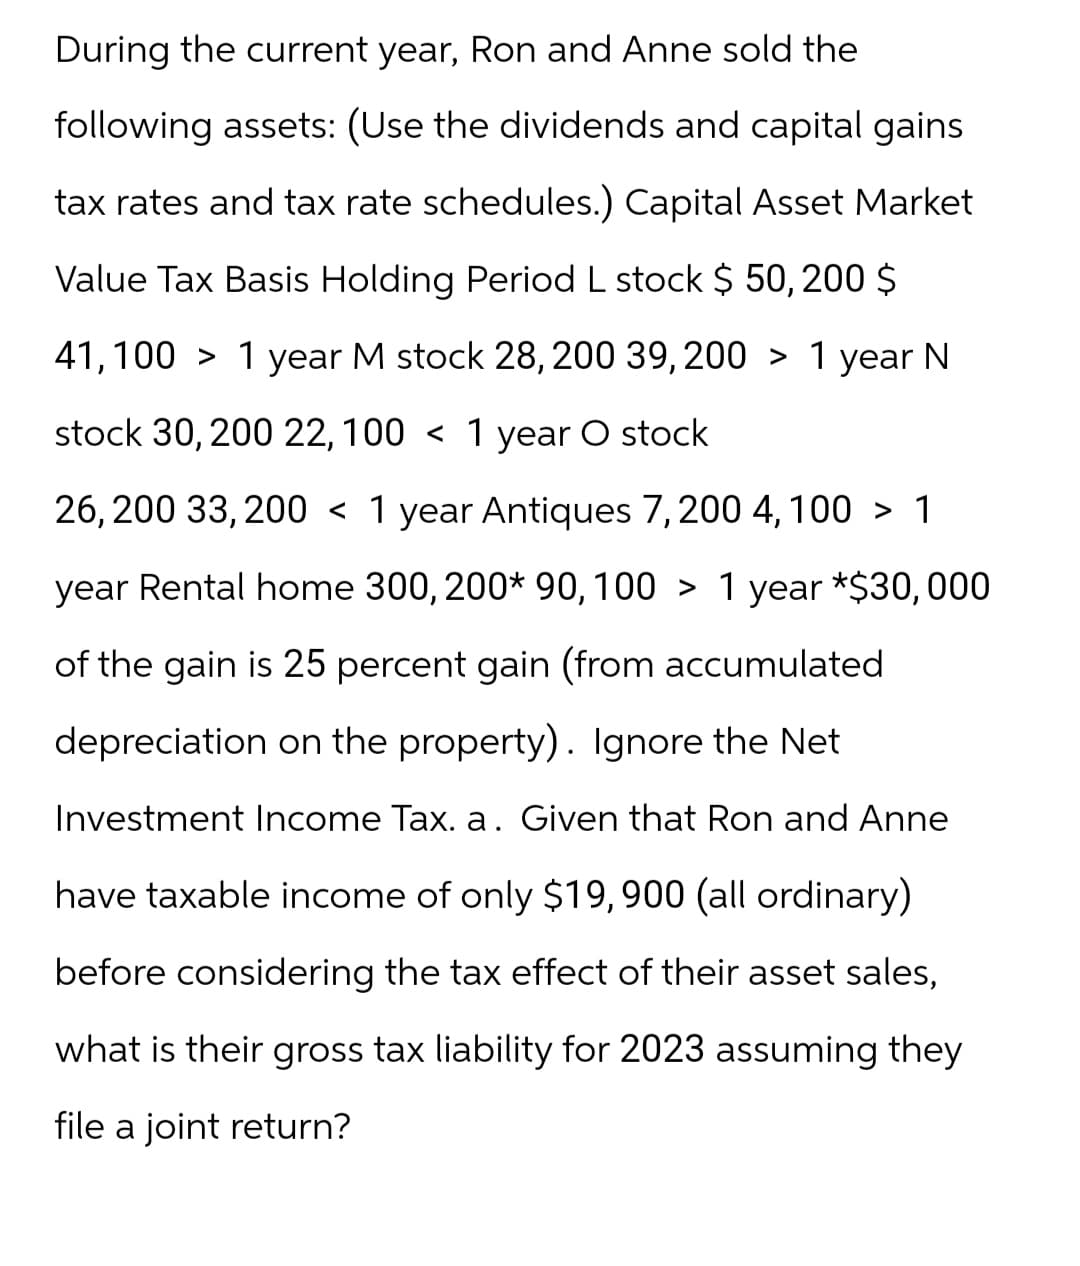 During the current year, Ron and Anne sold the
following assets: (Use the dividends and capital gains
tax rates and tax rate schedules.) Capital Asset Market
Value Tax Basis Holding Period L stock $ 50, 200 $
41,100 > 1 year M stock 28, 200 39, 200 > 1 year N
stock 30, 200 22, 100 < 1 year O stock
26, 200 33,200 < 1 year Antiques 7,200 4, 100 > 1
year Rental home 300, 200* 90, 100 > 1 year *$30,000
of the gain is 25 percent gain (from accumulated
depreciation on the property). Ignore the Net
Investment Income Tax. a. Given that Ron and Anne
have taxable income of only $19,900 (all ordinary)
before considering the tax effect of their asset sales,
what is their gross tax liability for 2023 assuming they
file a joint return?